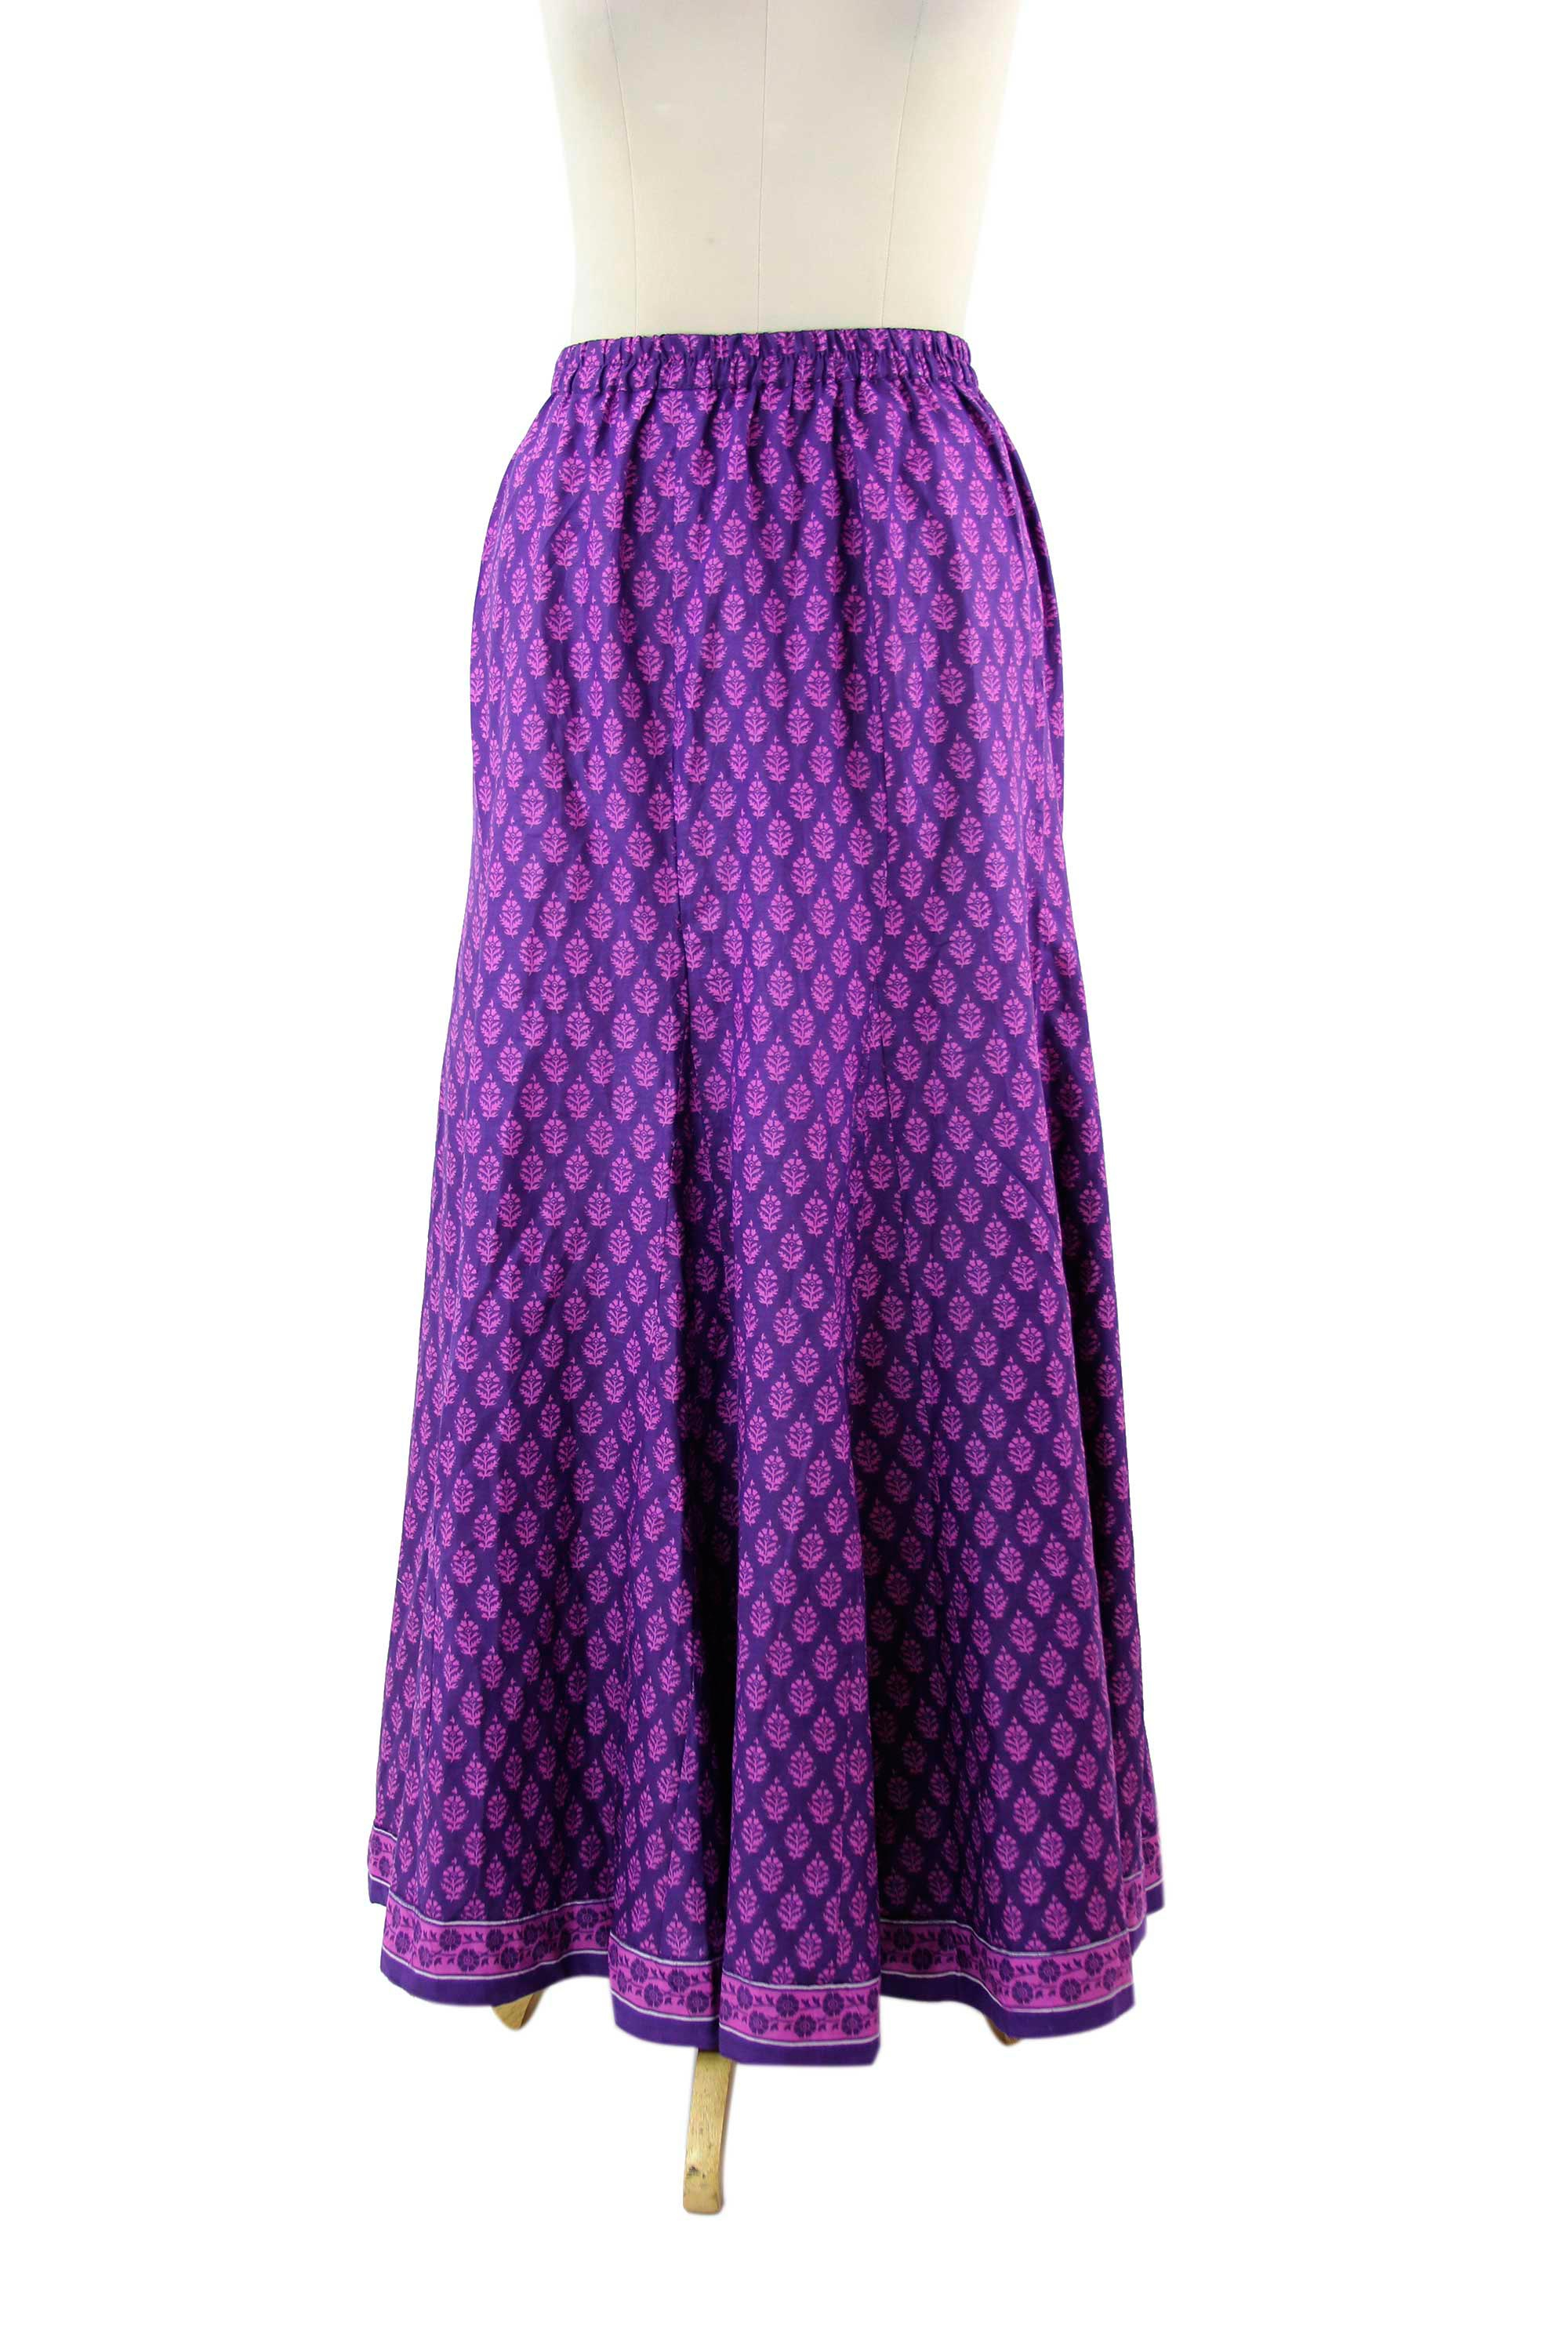 Women's Purple and Lilac Floral Print Long Skirt from India - Radiant ...